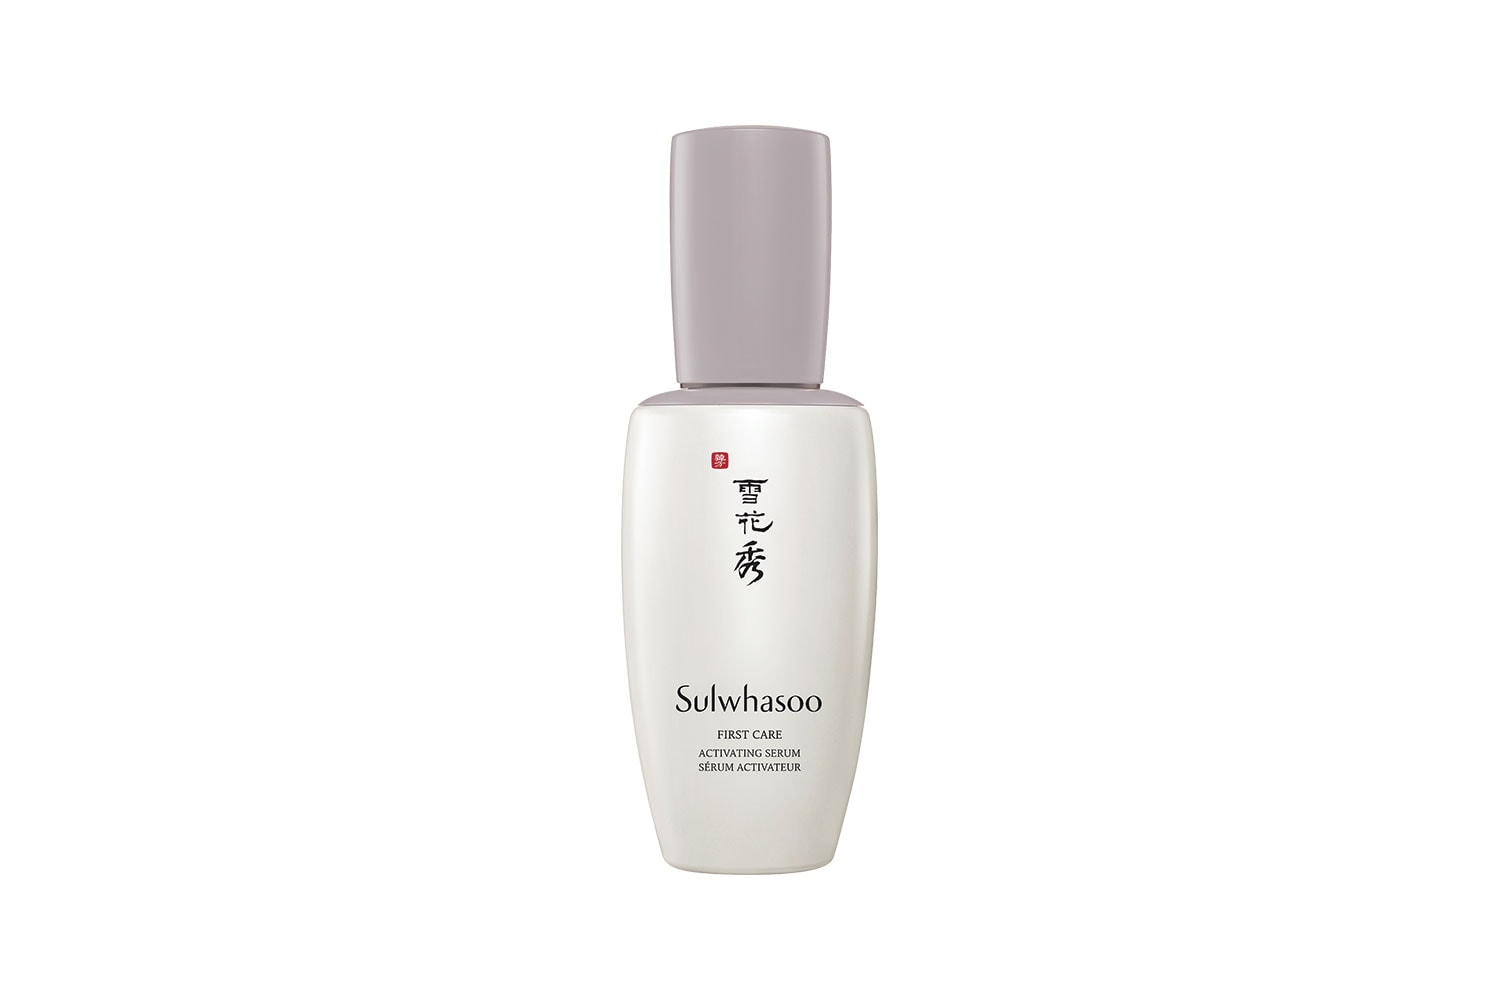 sulwhasoo first care activating serum k-beauty anti-aging new scents skincare korean brand